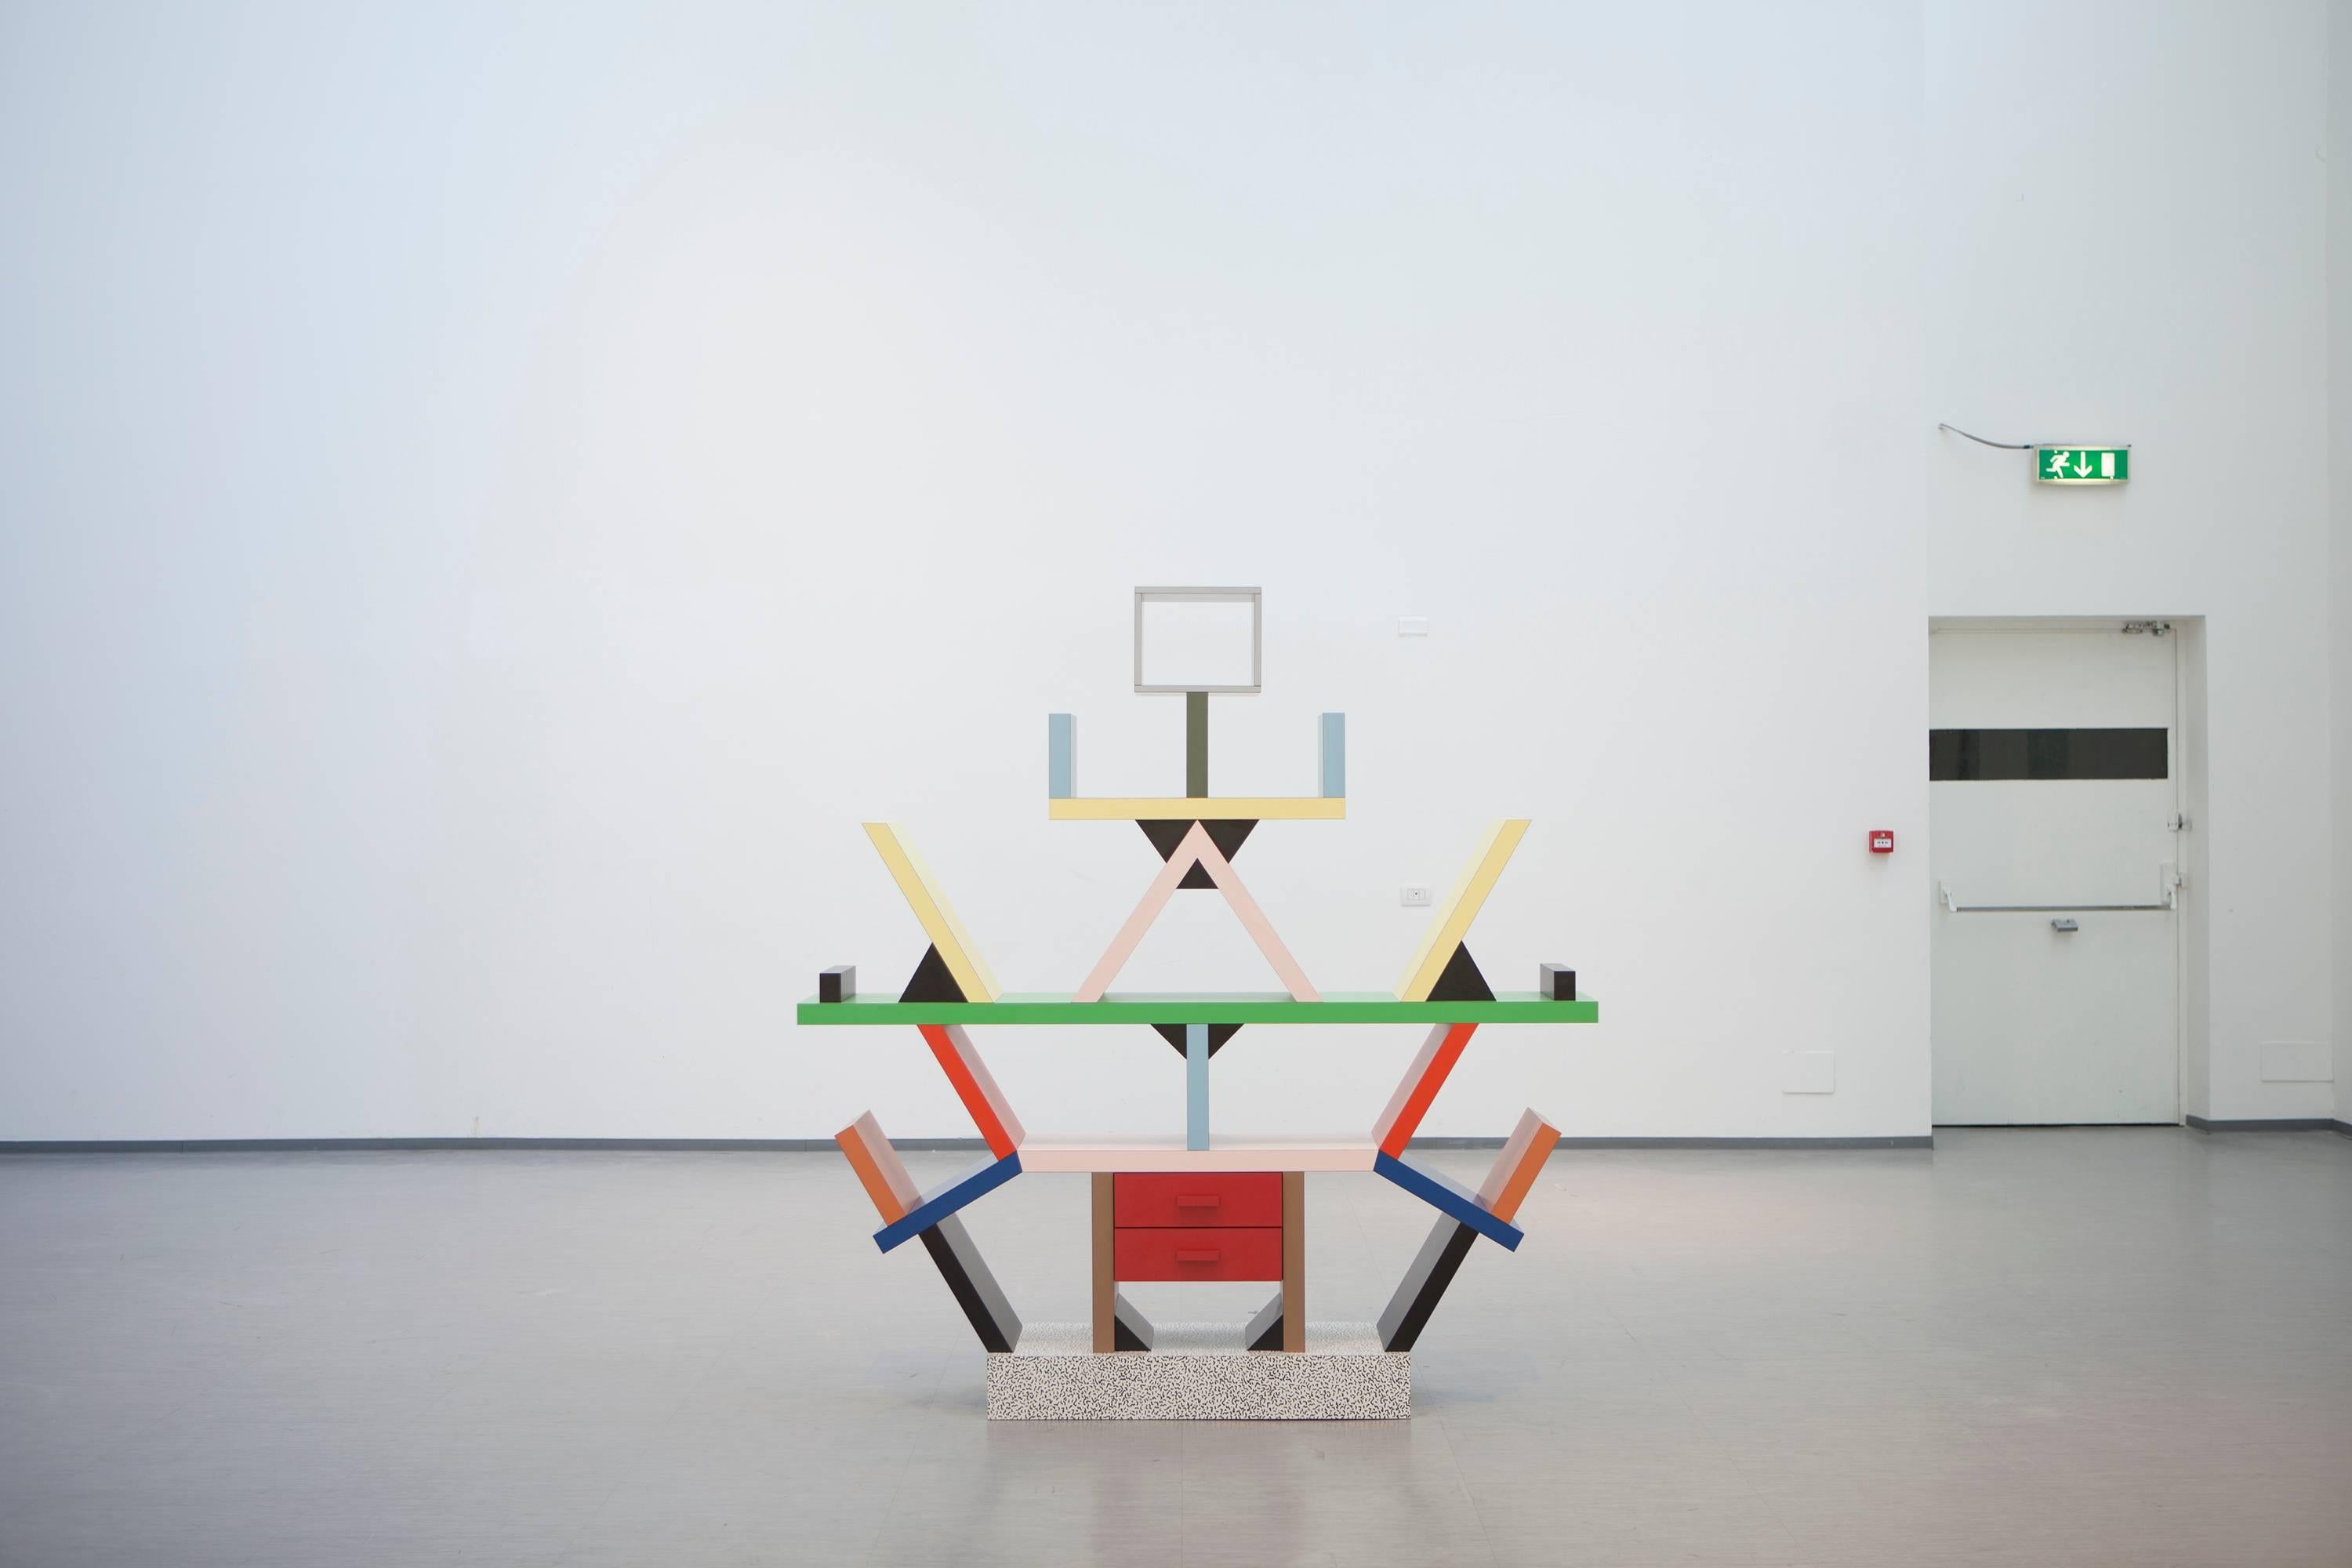 Carlton is undoubtedly the most famous and iconic of all the items designed for Memphis Milano. The piece was designed by Ettore Sottsass himself and was first presented at the historic Memphis exhibition in Milan on 18th September 1981.
Carlton is